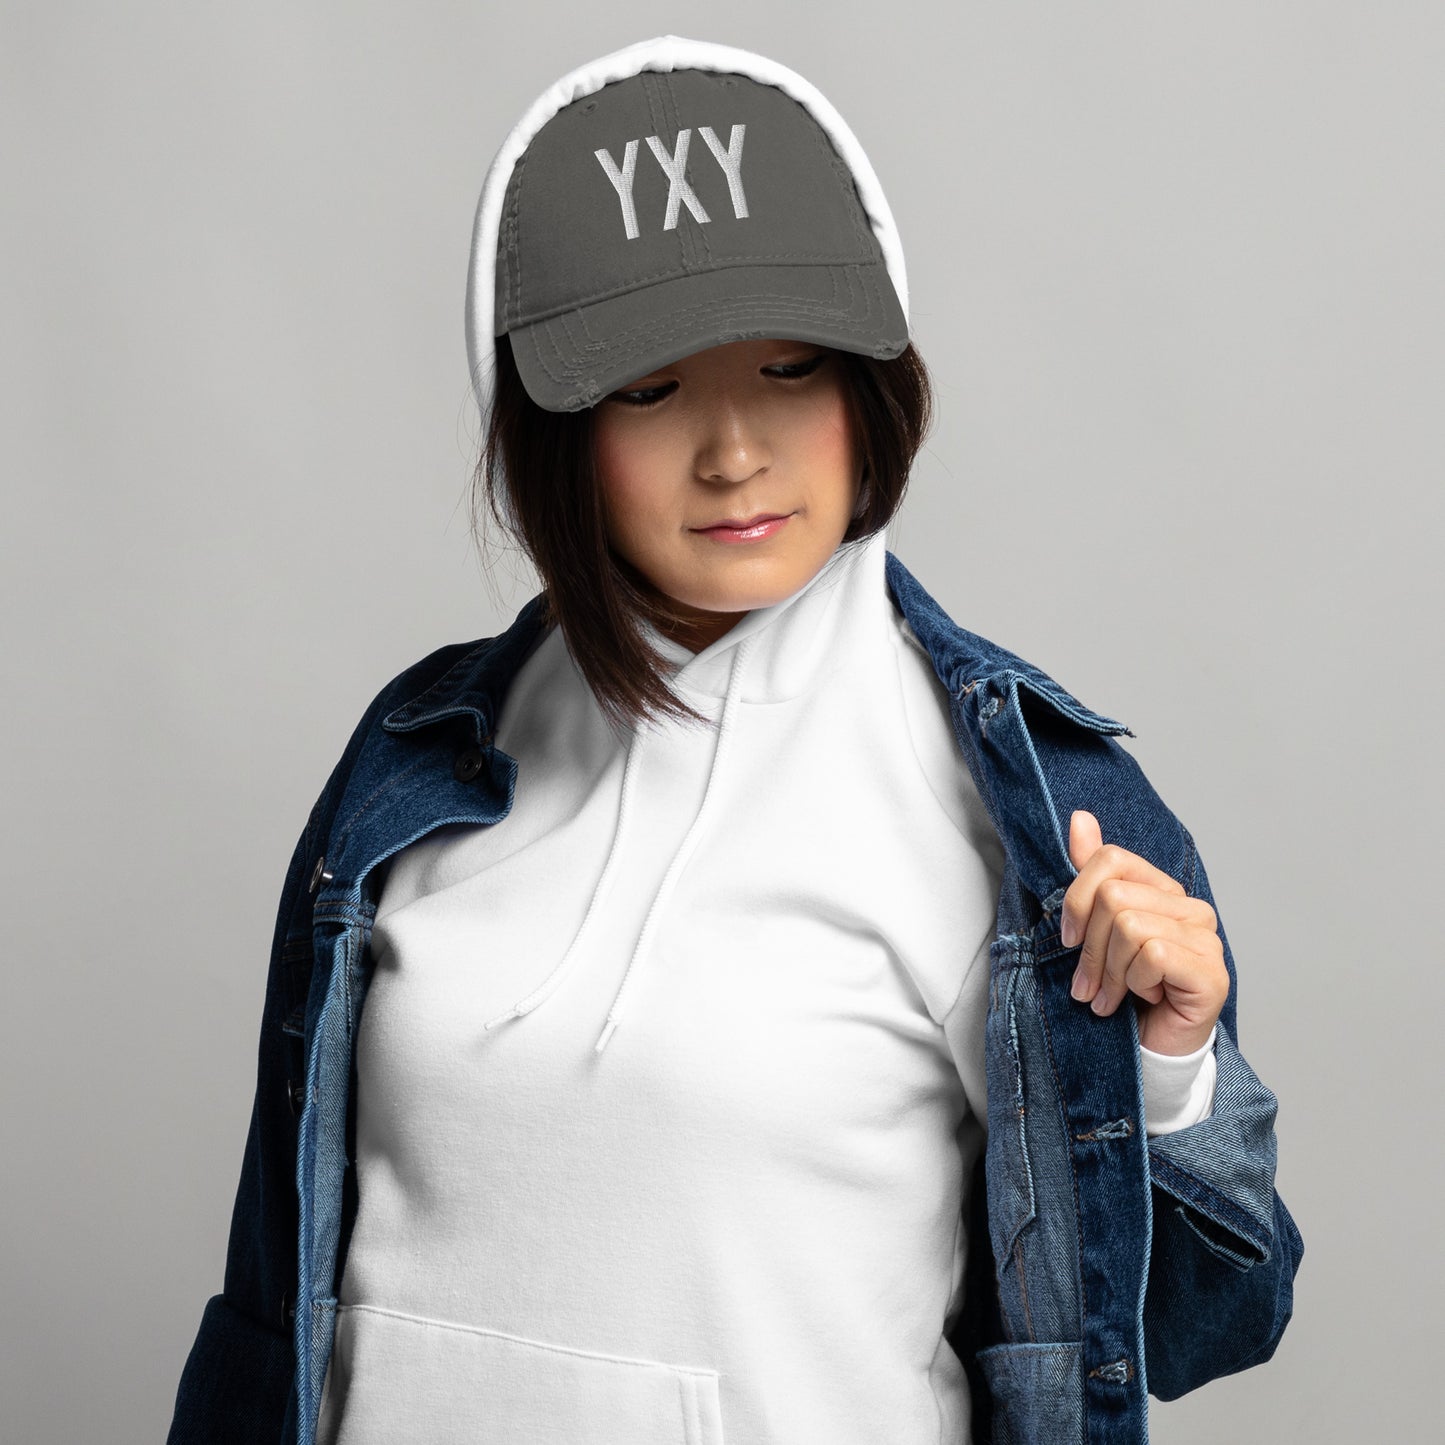 Airport Code Distressed Hat - White • YXY Whitehorse • YHM Designs - Image 06